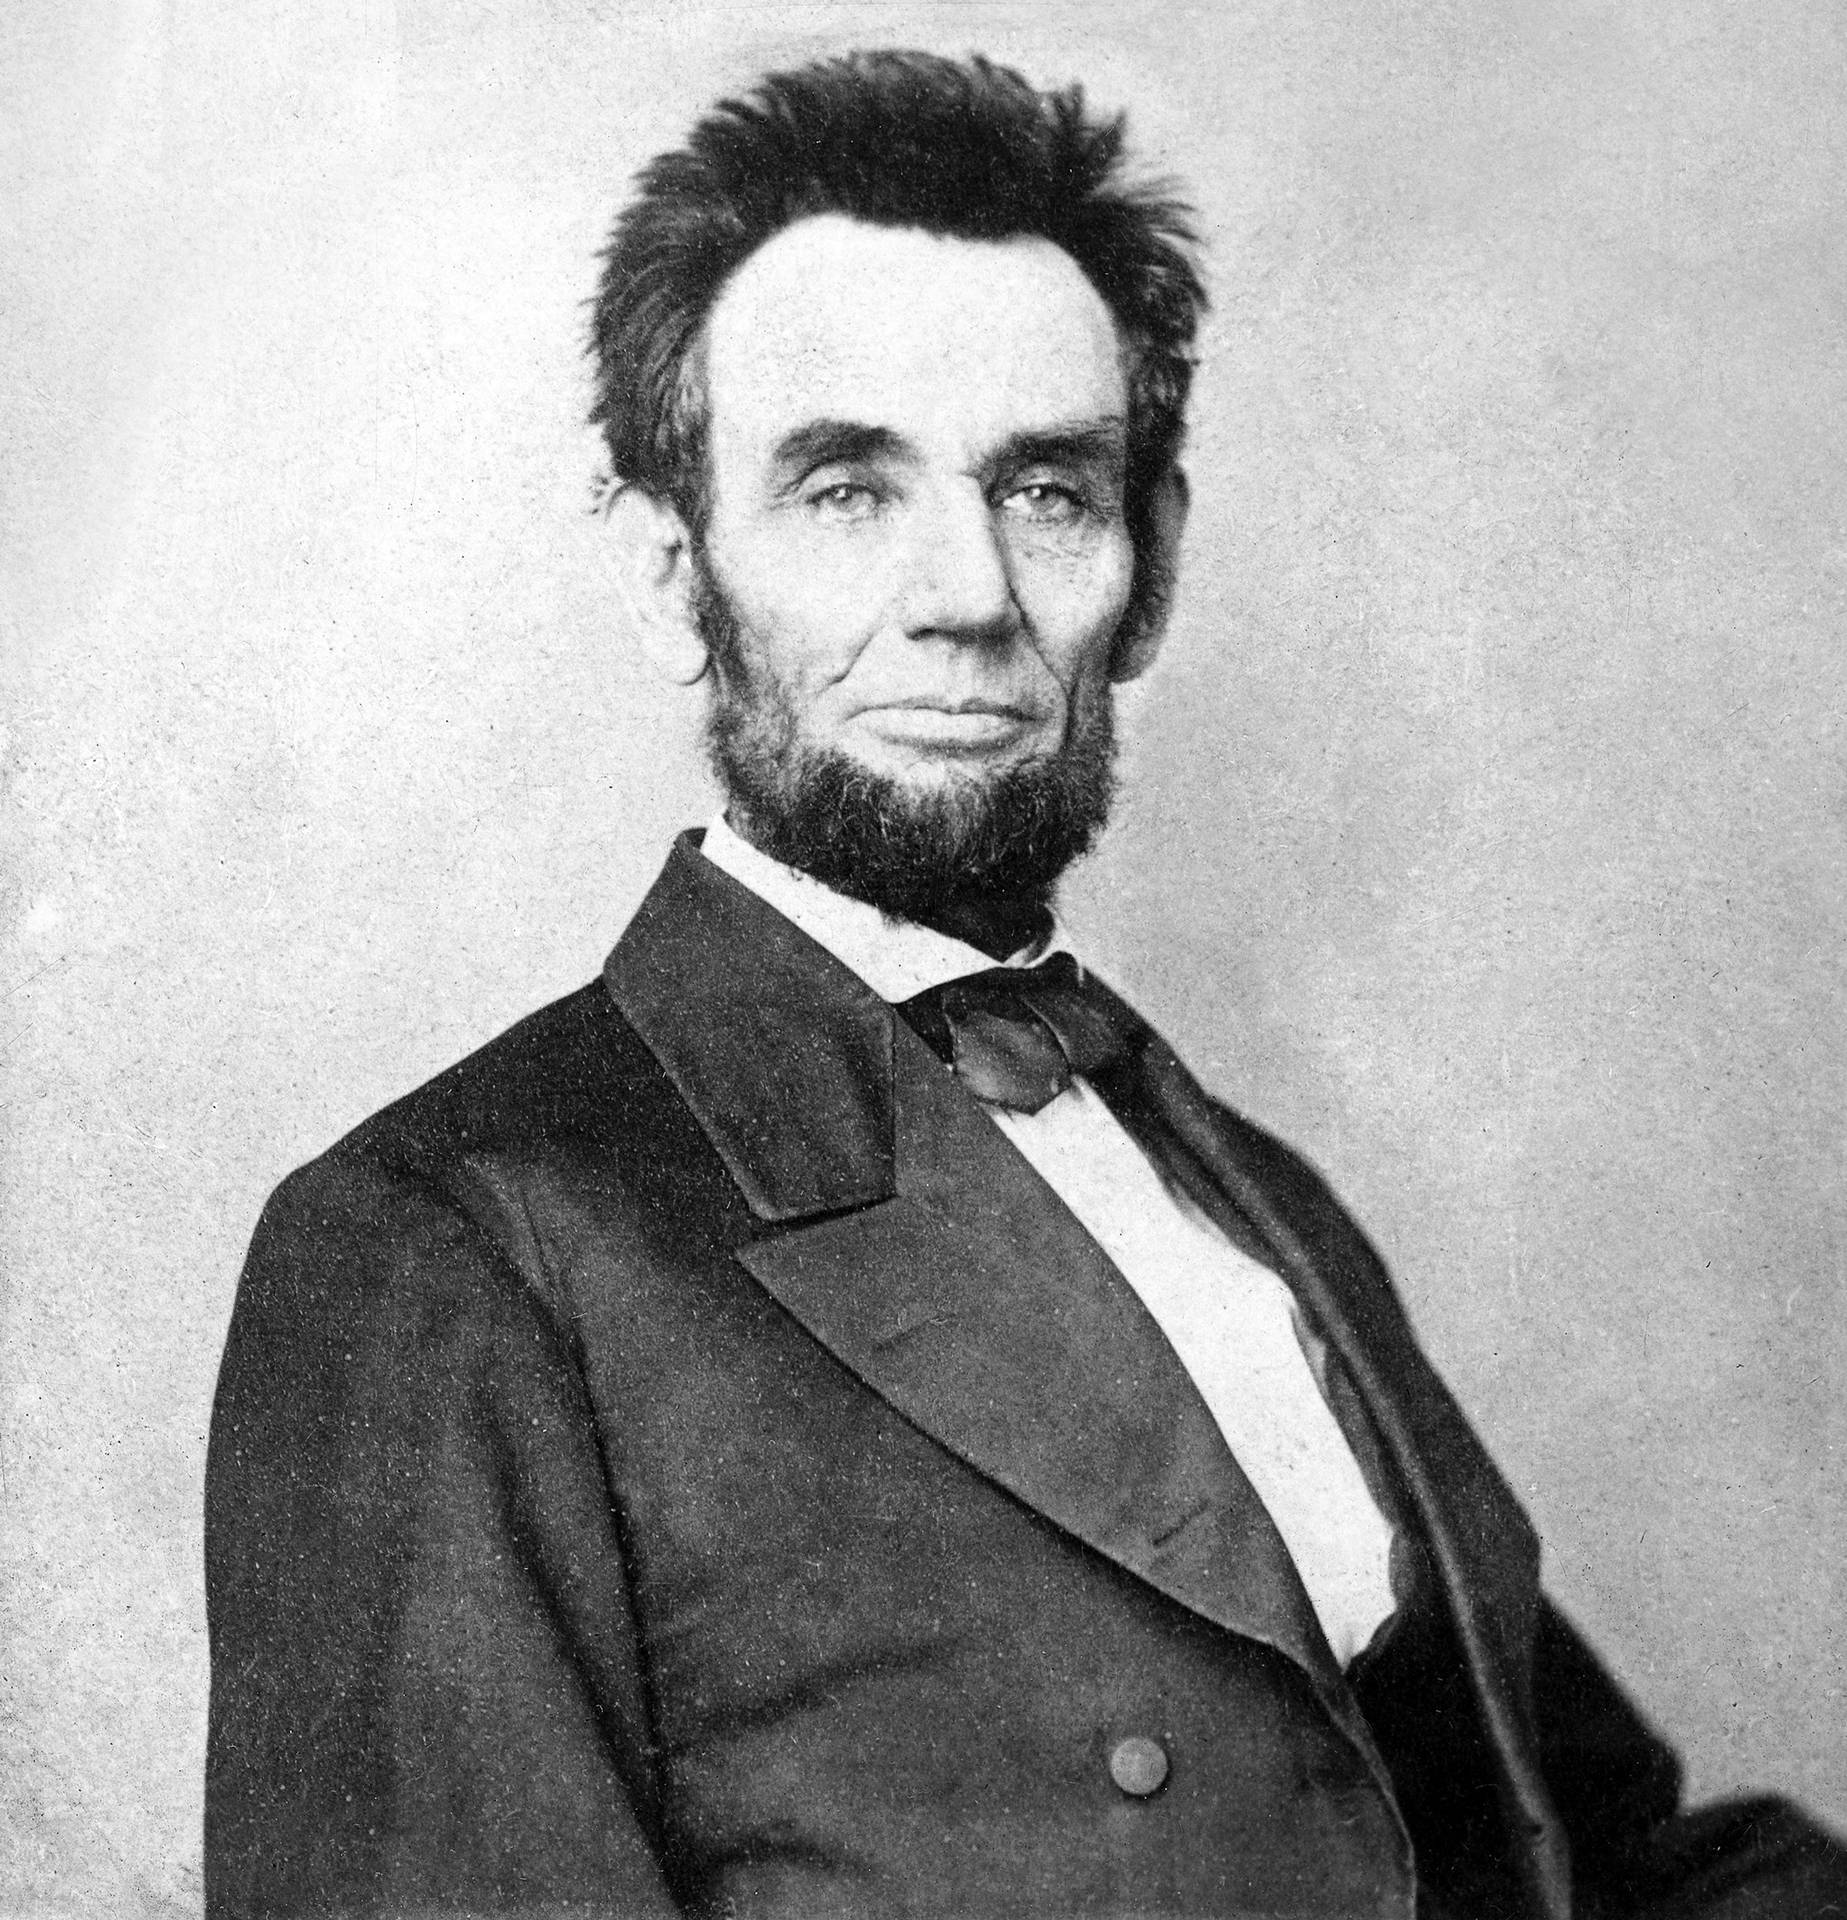 President Abraham Lincoln with a short haircut. Wallpaper